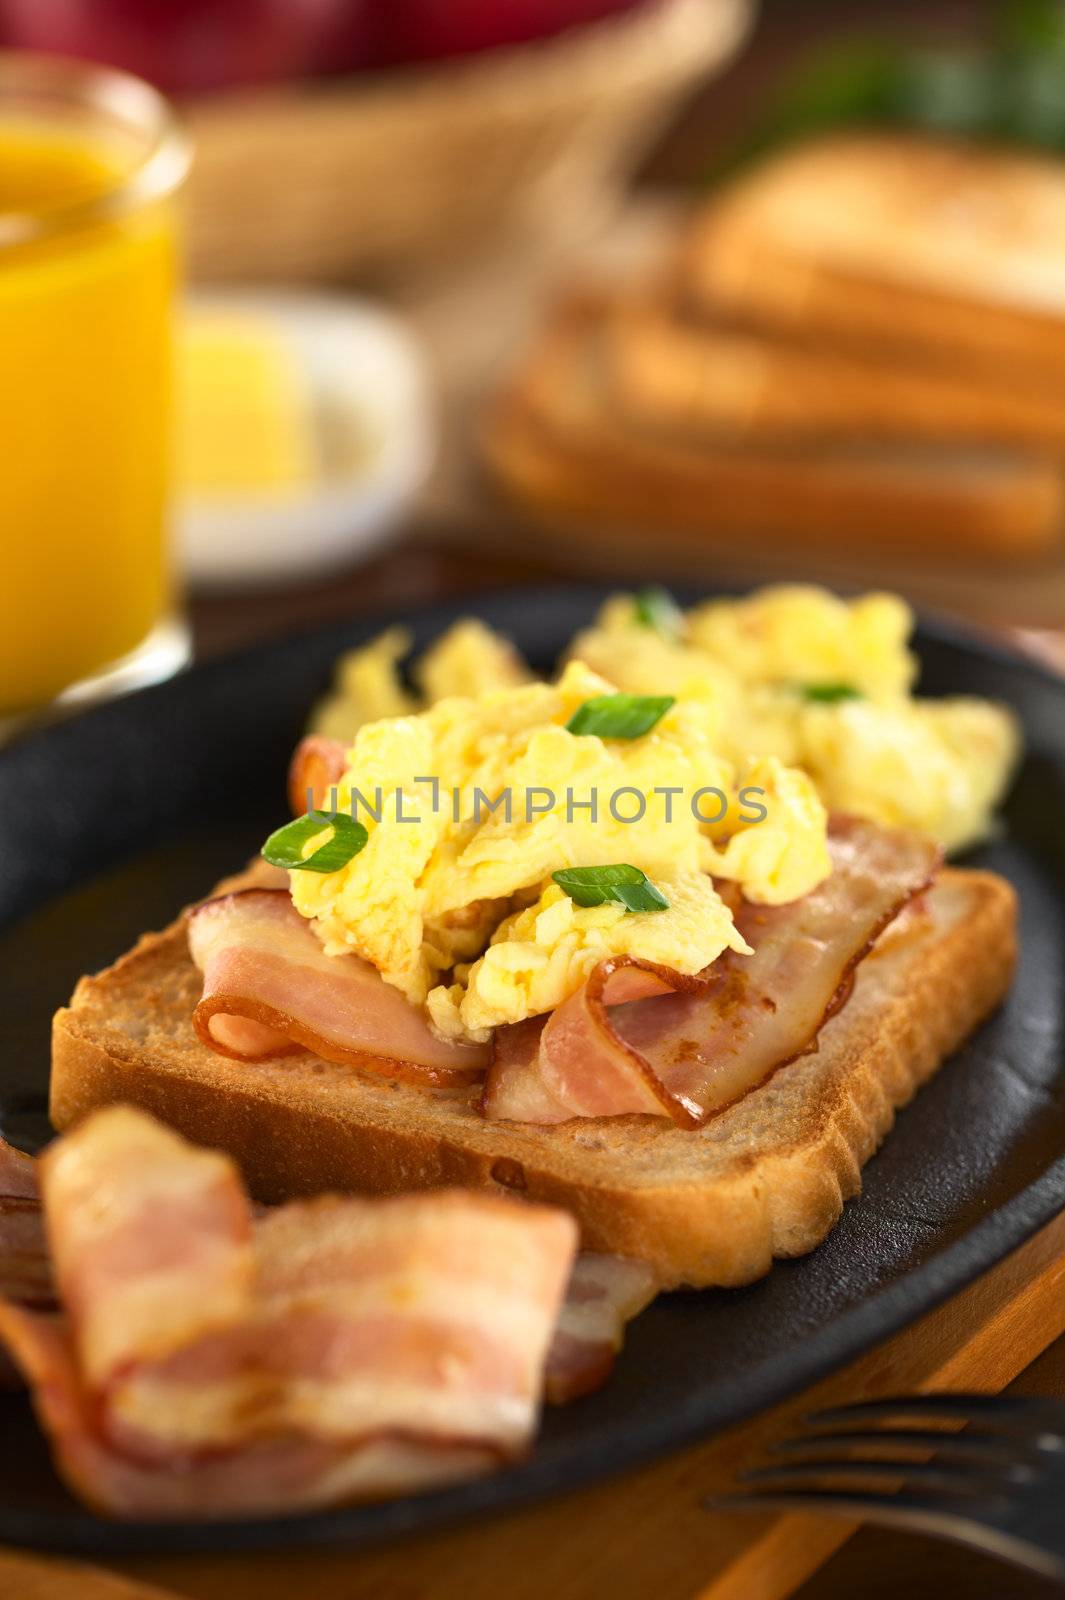 Bacon and Egg on Toast Bread by ildi